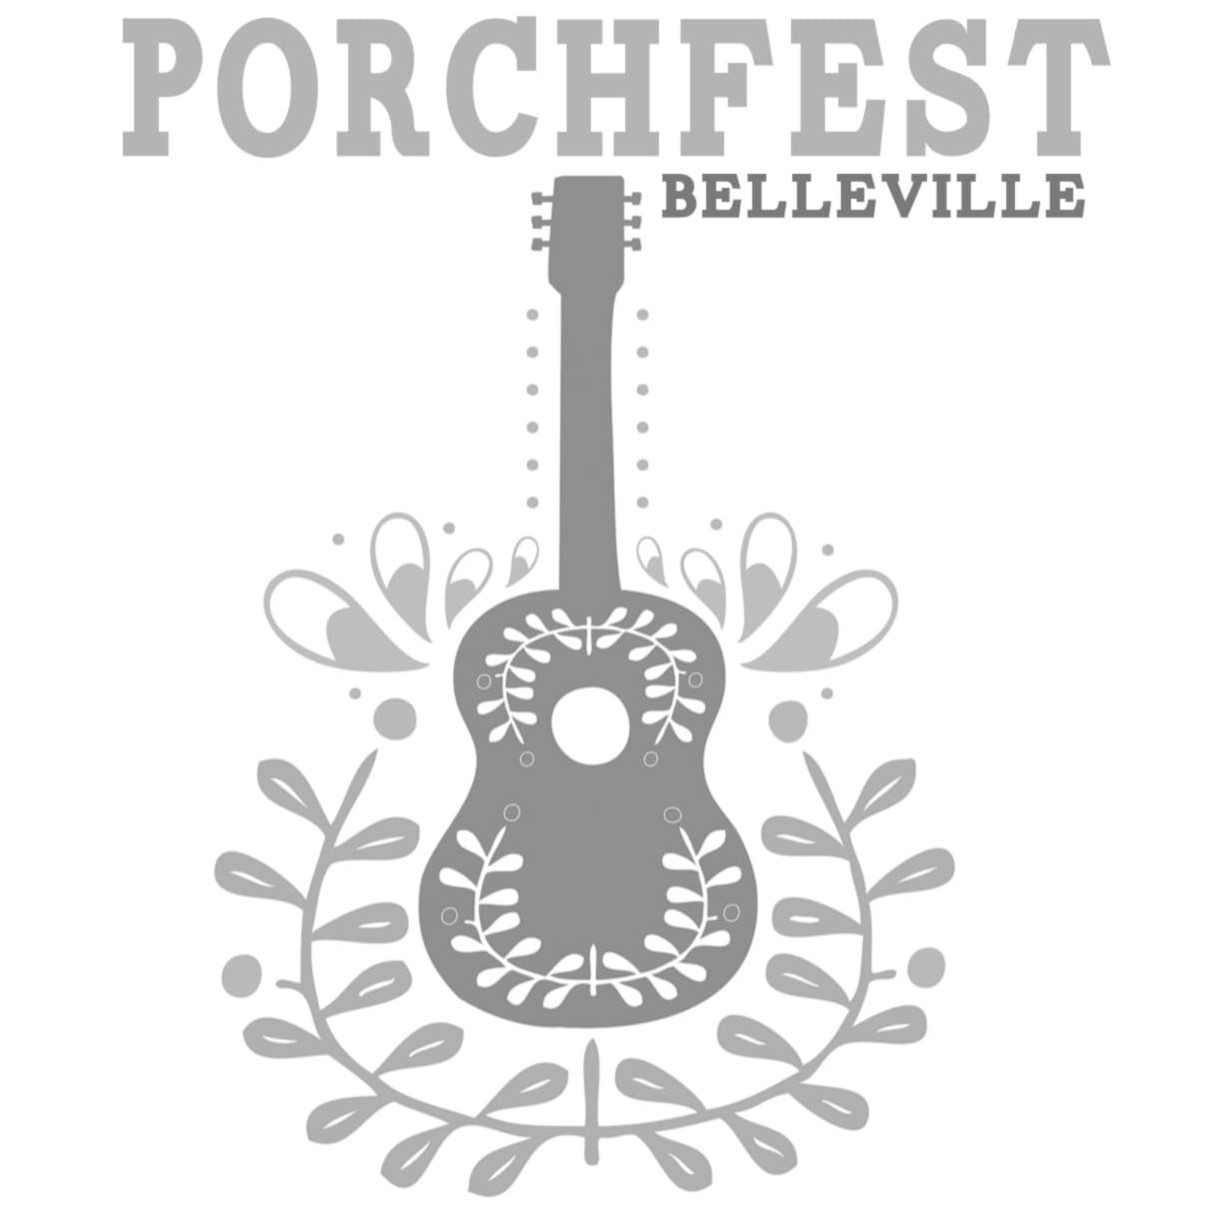 Poster titled Porchfest Belleville with a photo of an acoustic guitar.